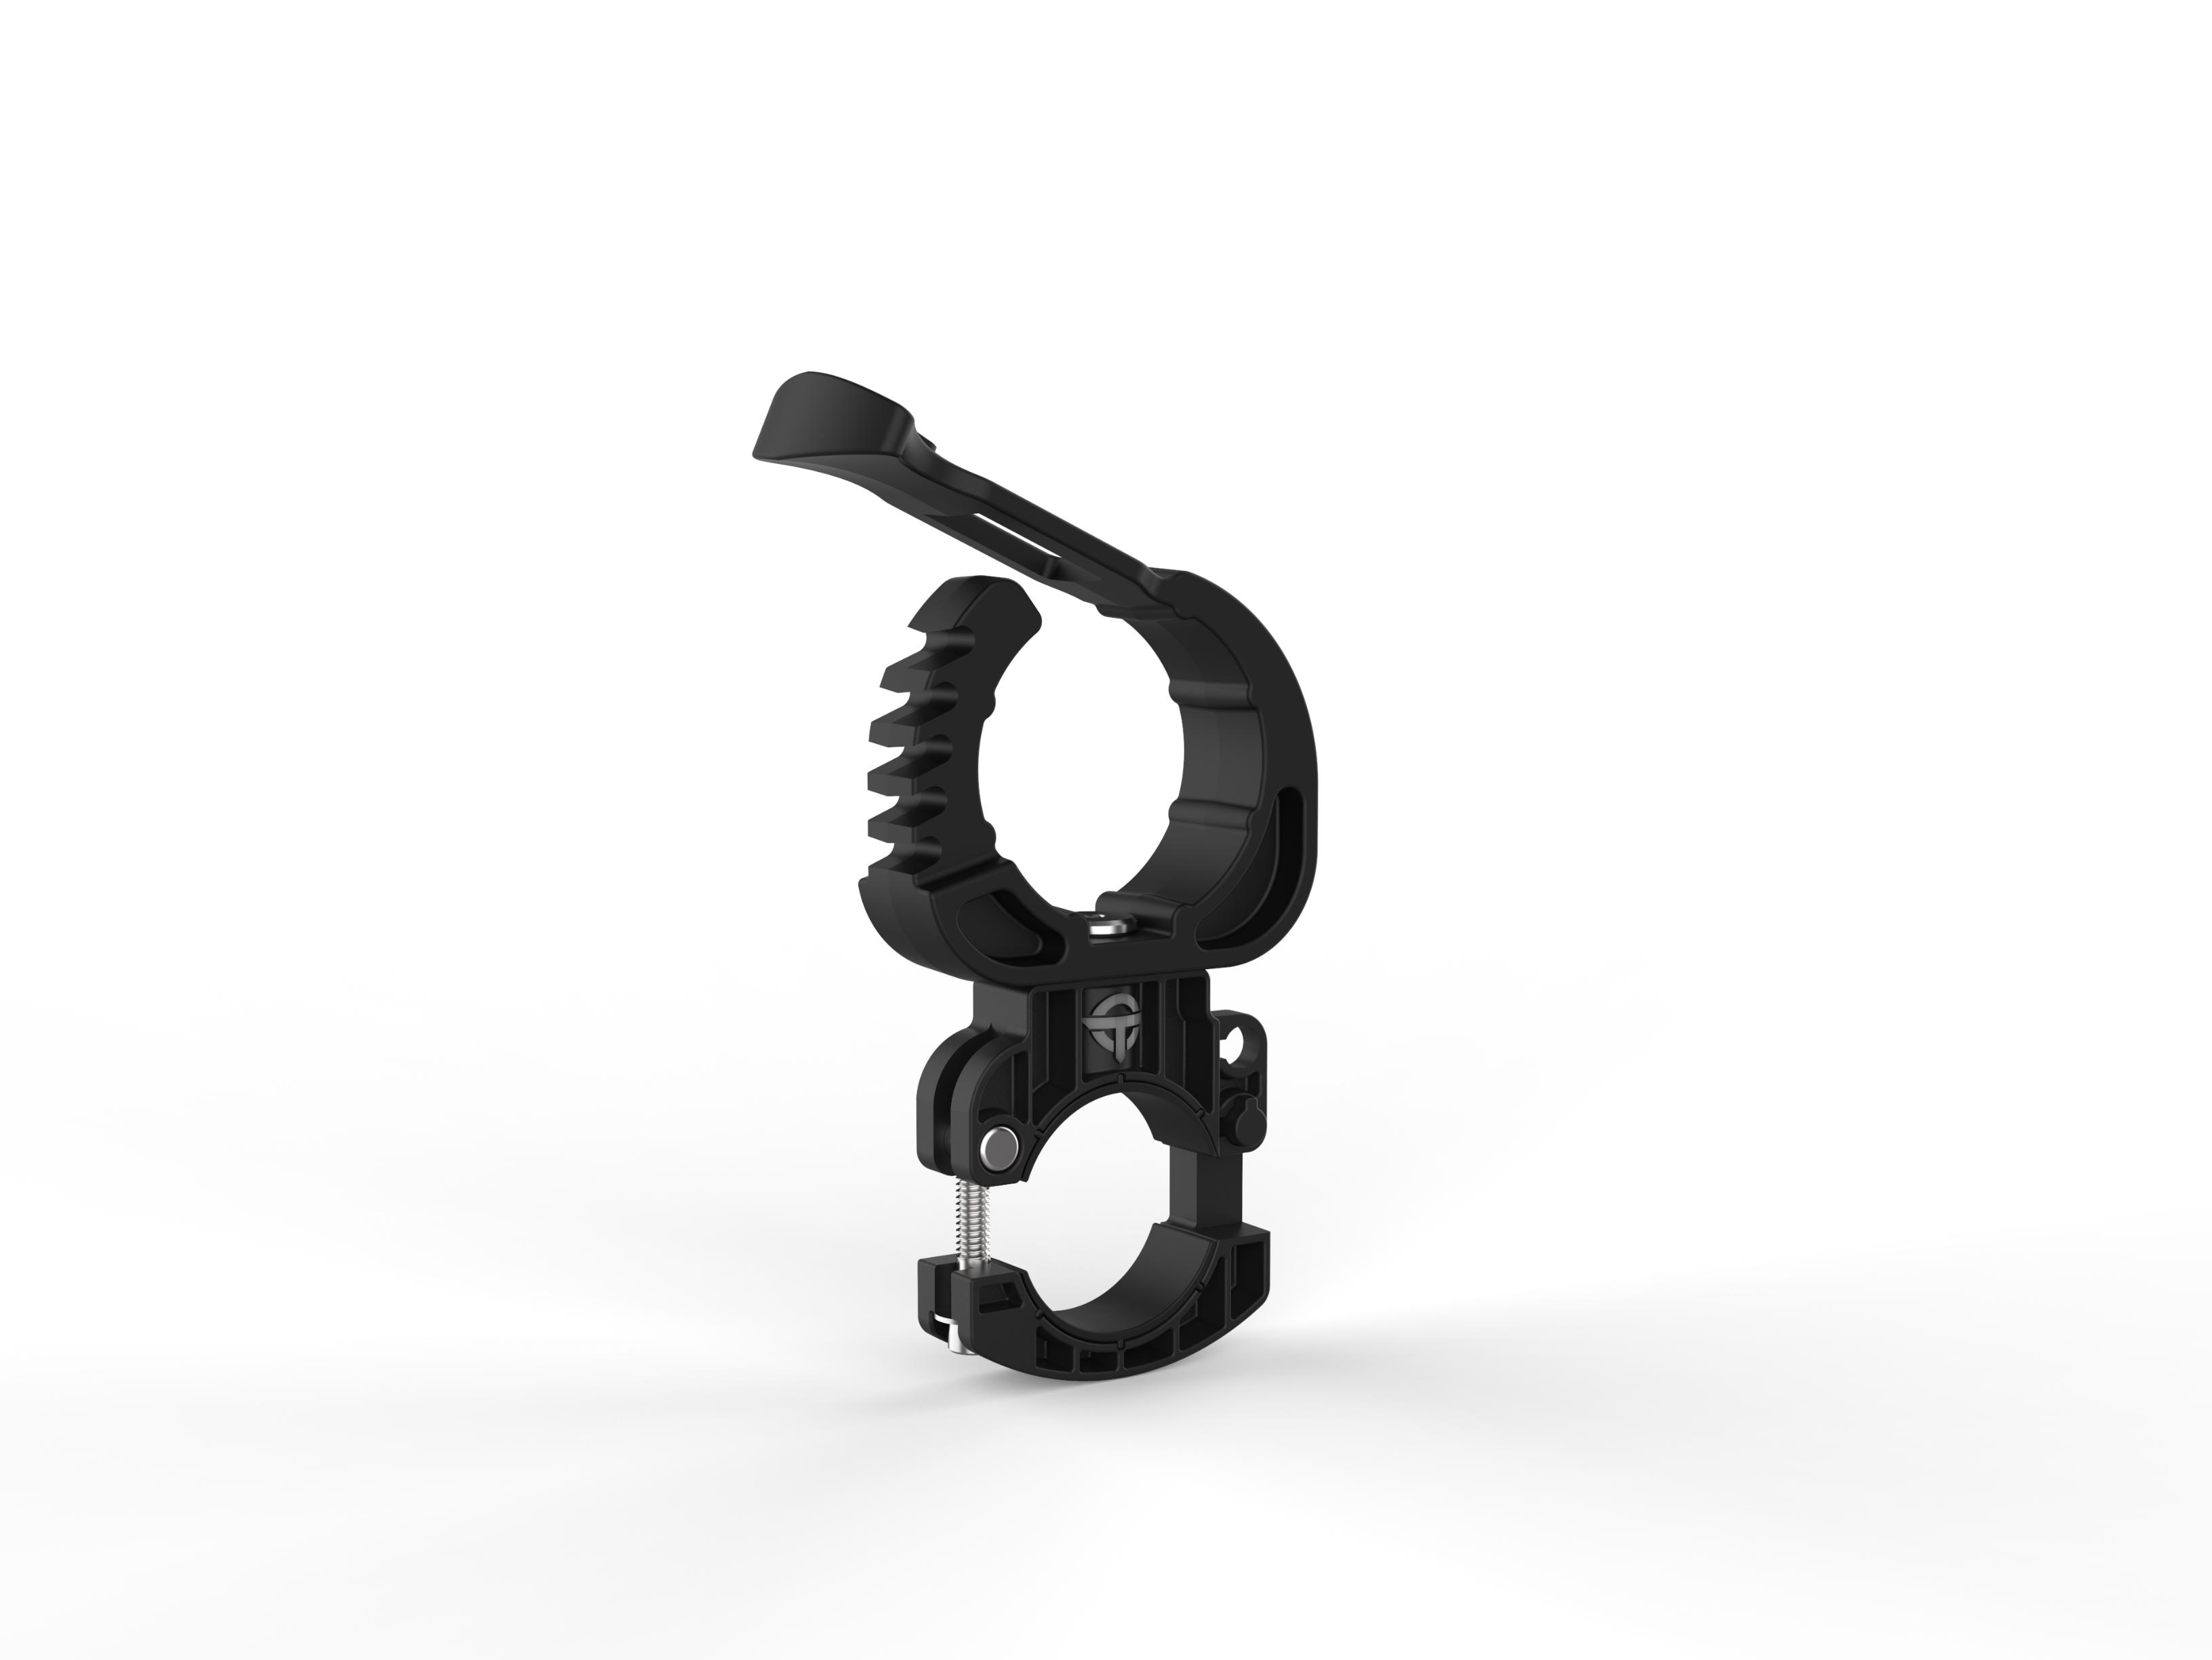 Open Trail - Large Universal Mount Clamp - PSUSMULG